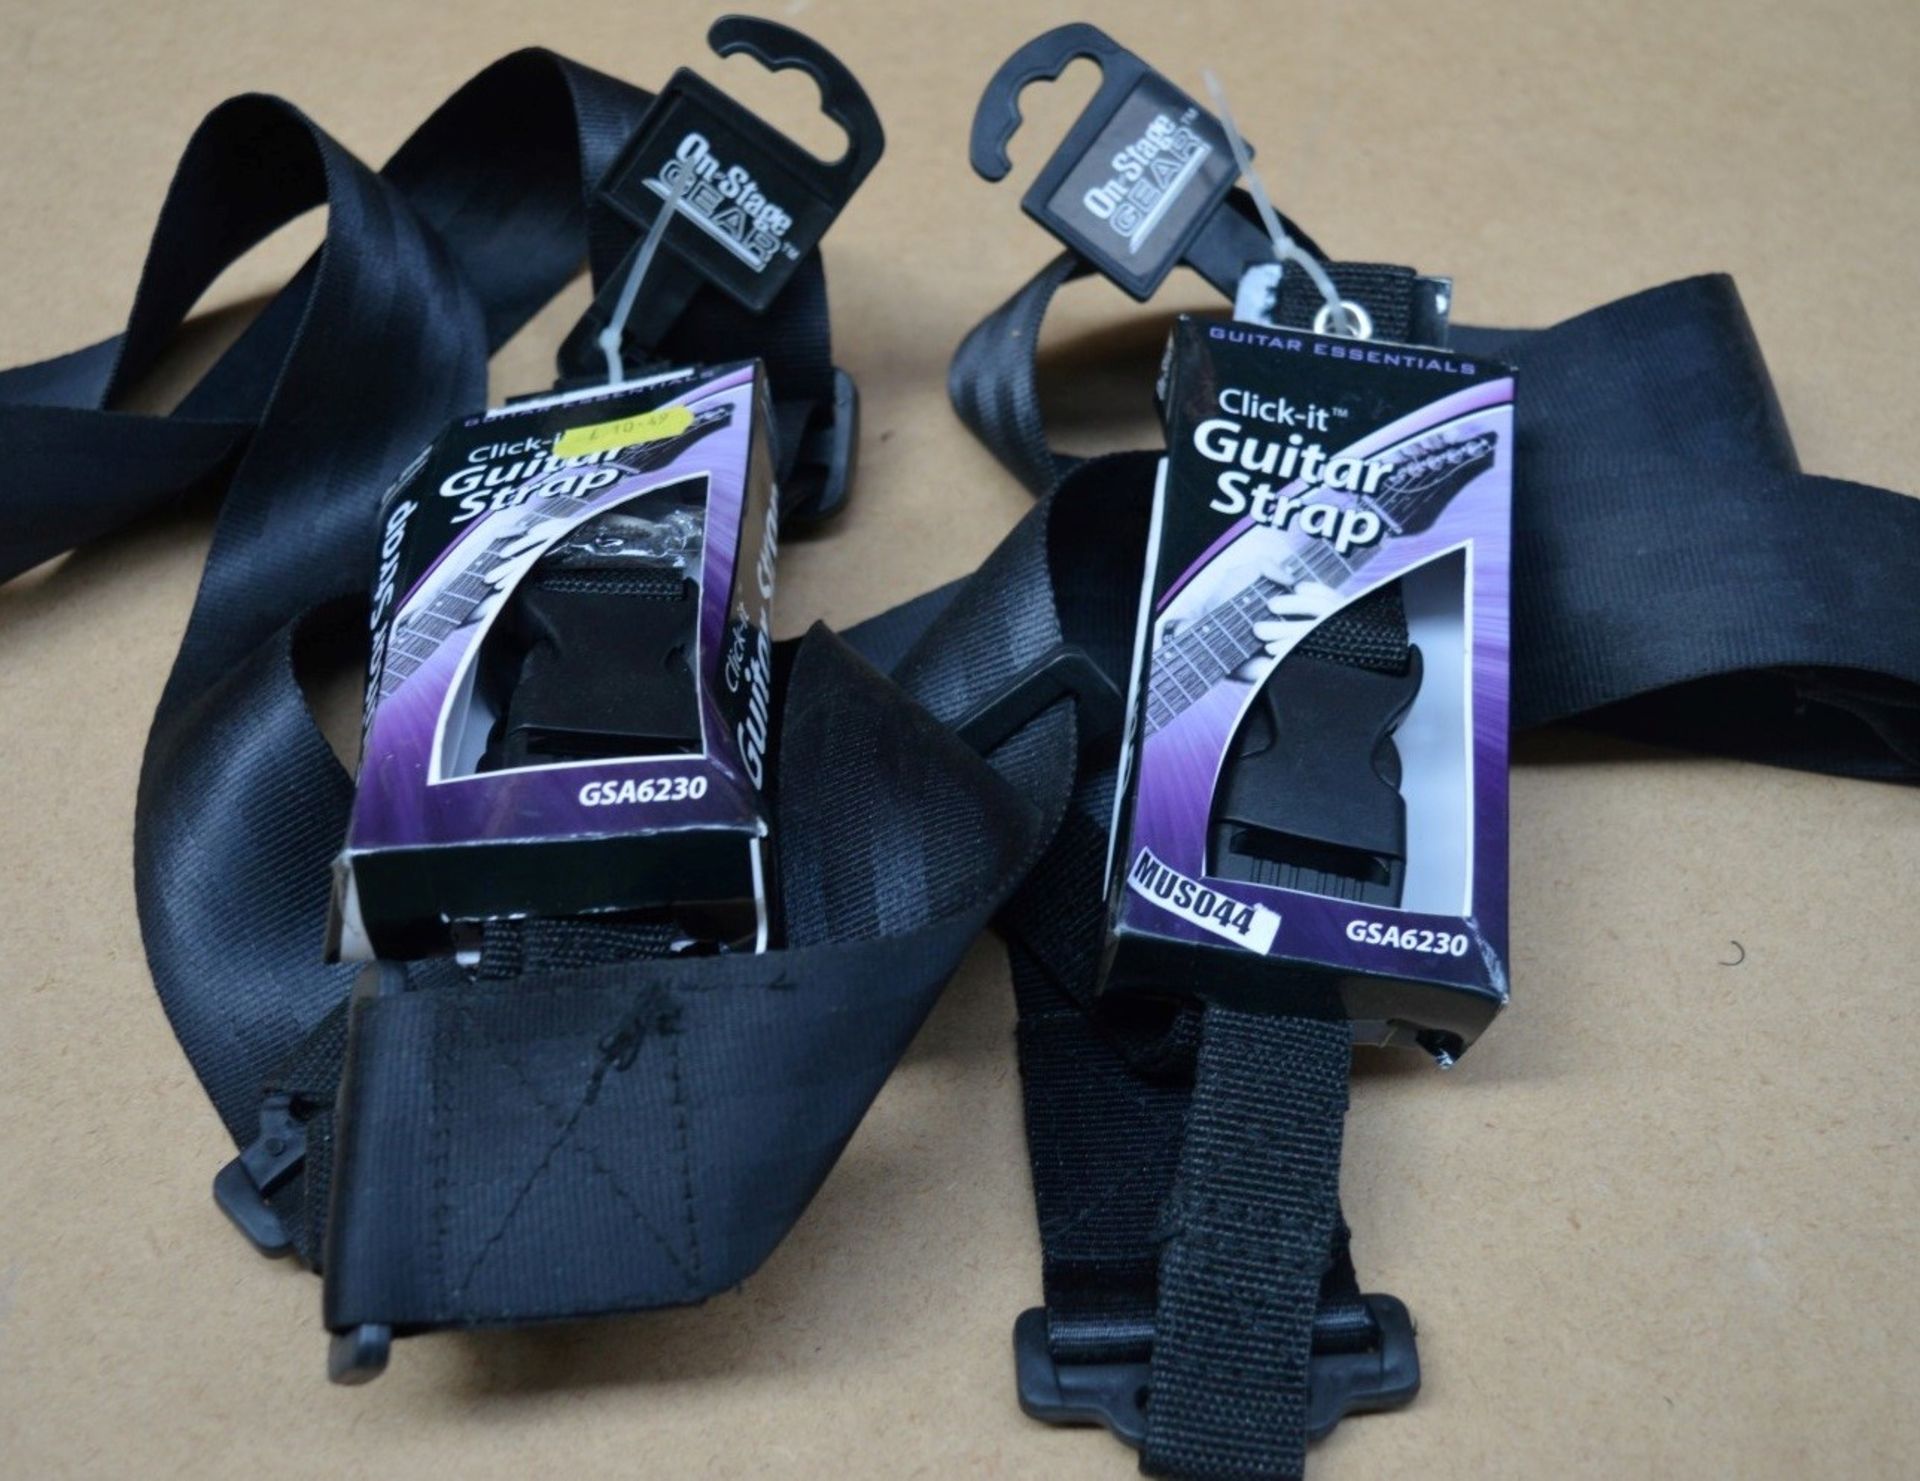 2 x On Stage Click It Guitar / Bass Straps - Product GSA6230 - CL020 - Ref Mus044 - New and Unused - Image 3 of 4